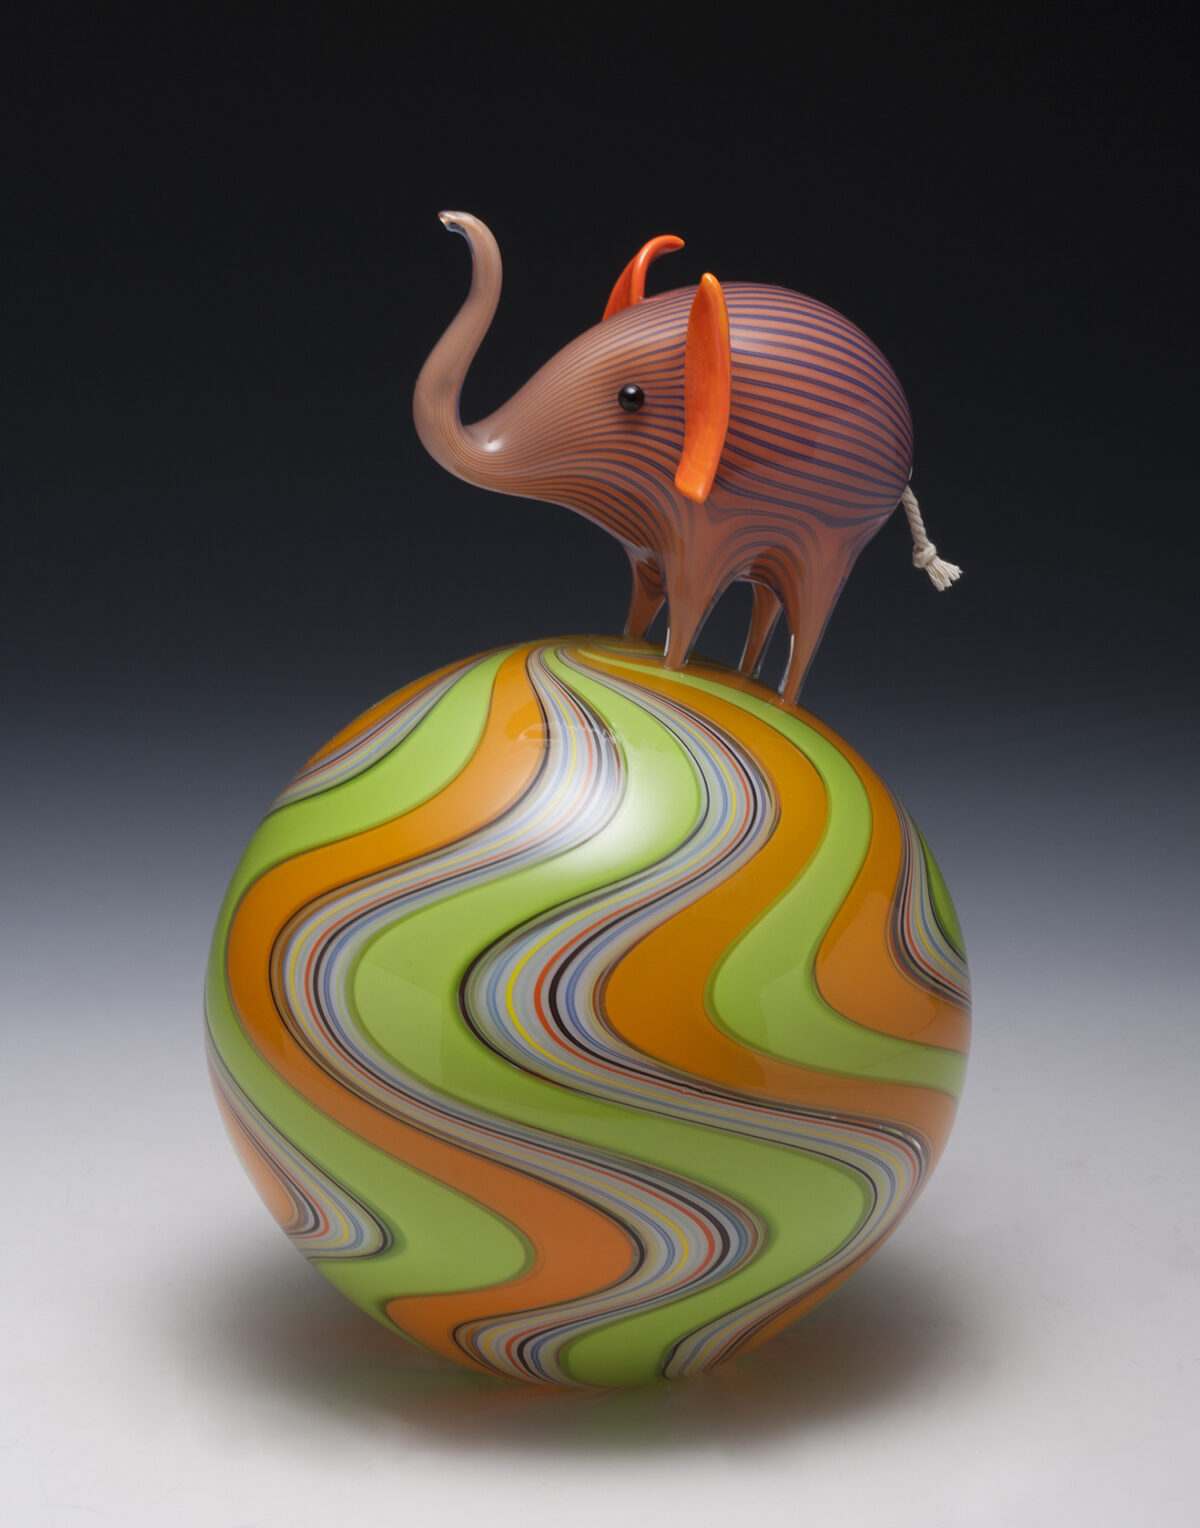 Wavelength Gorgeous Animal Glass Sculptures With Vibrant Colors By Claire Kelly